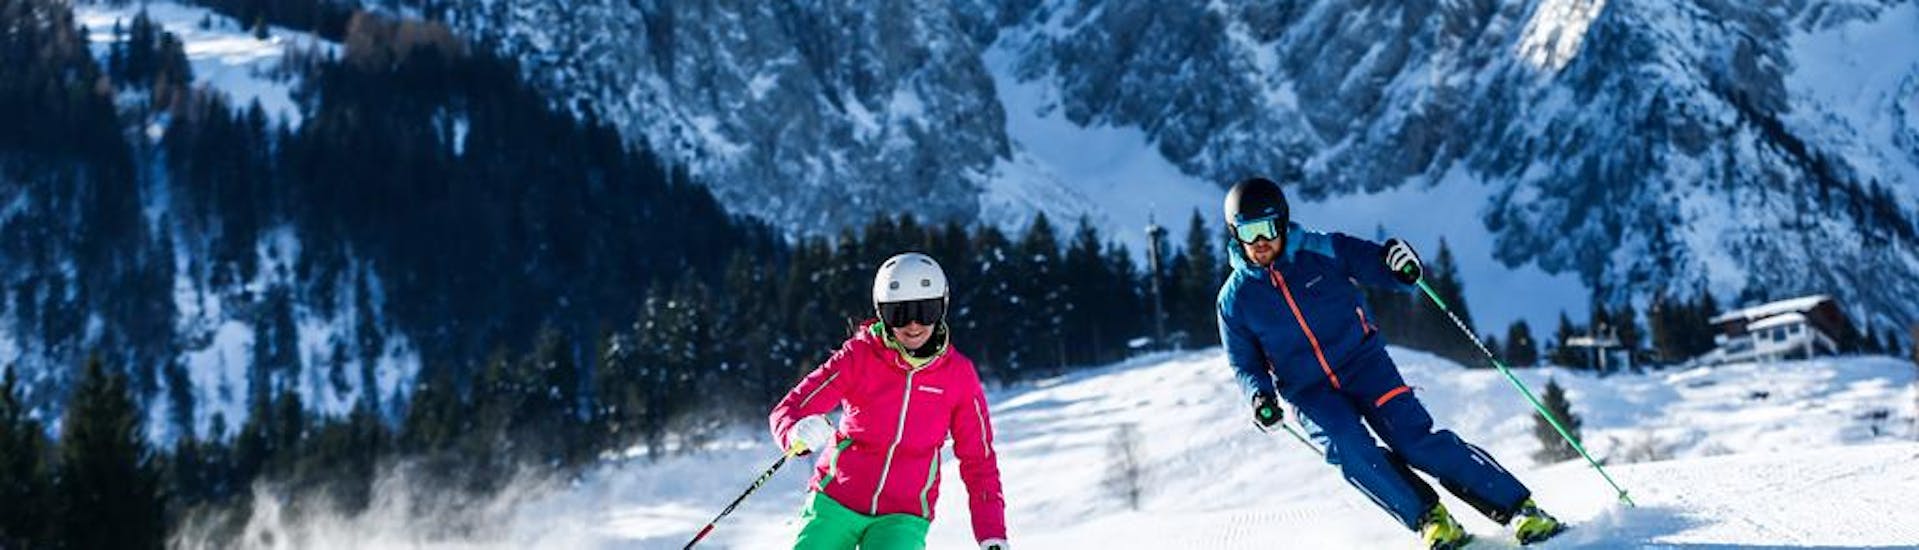 private-ski-lessons-for-adults-of-all-levels-skischule-zahmer-kaiser-hero1